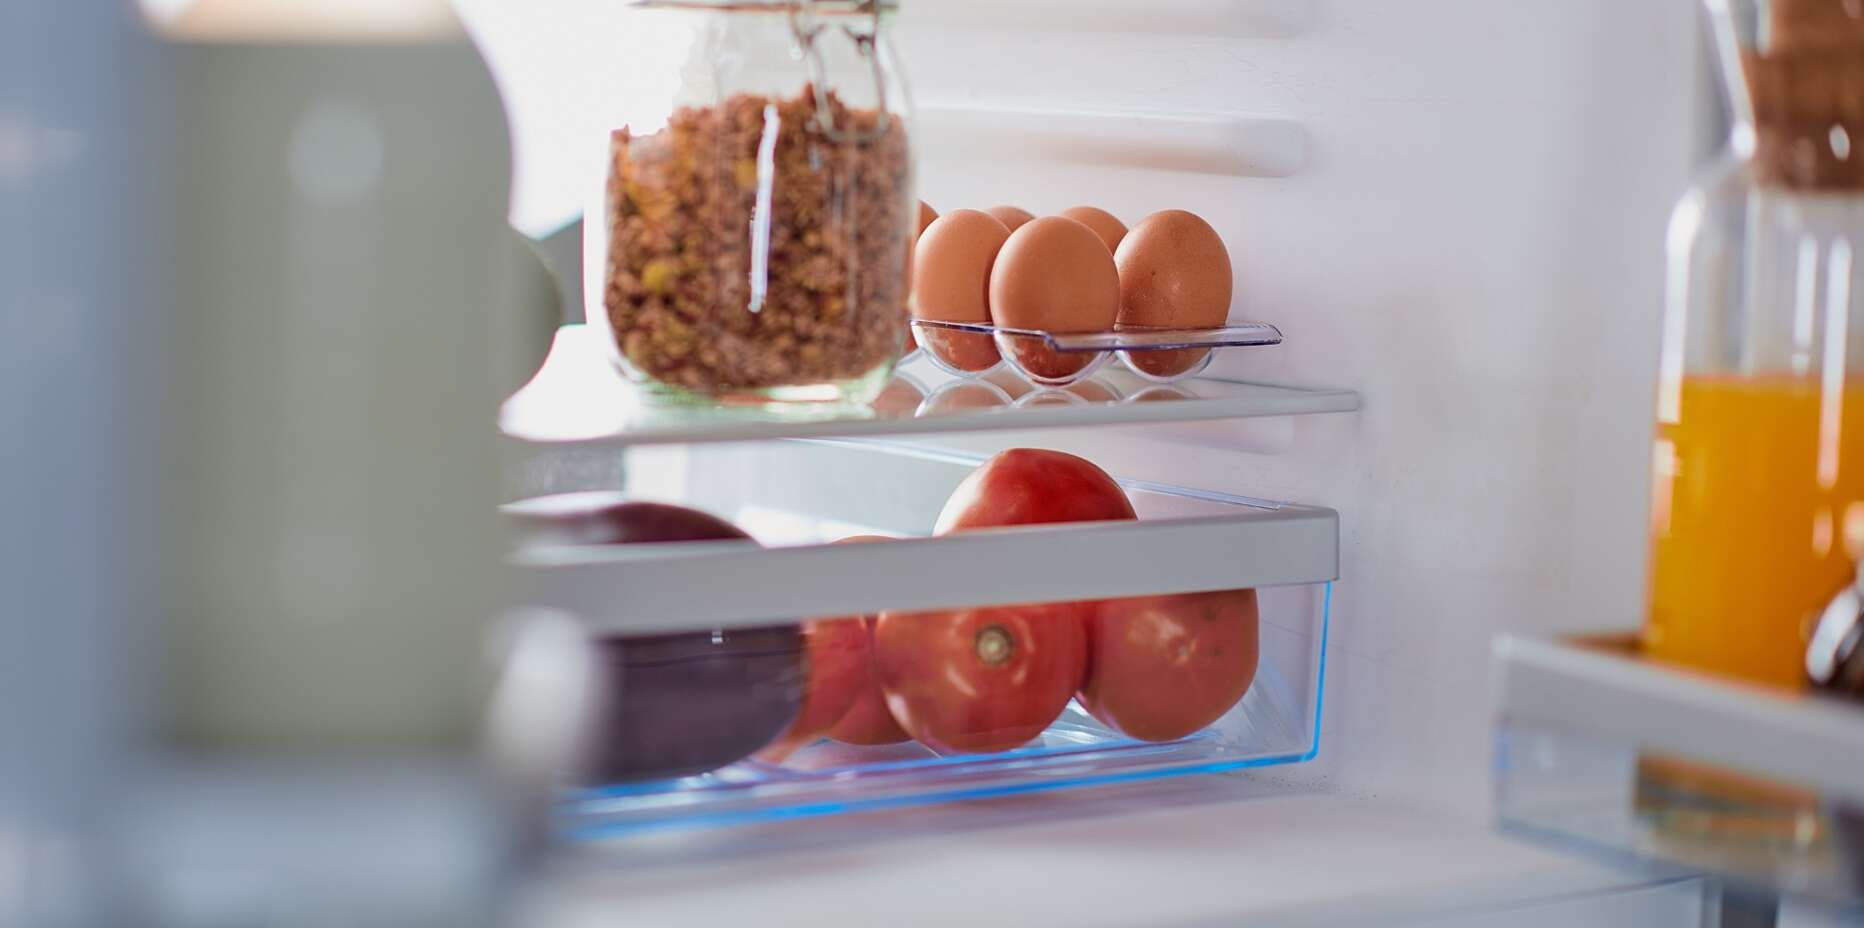 Downsizing Is the Key to Saving Tons of Refrigerator Space